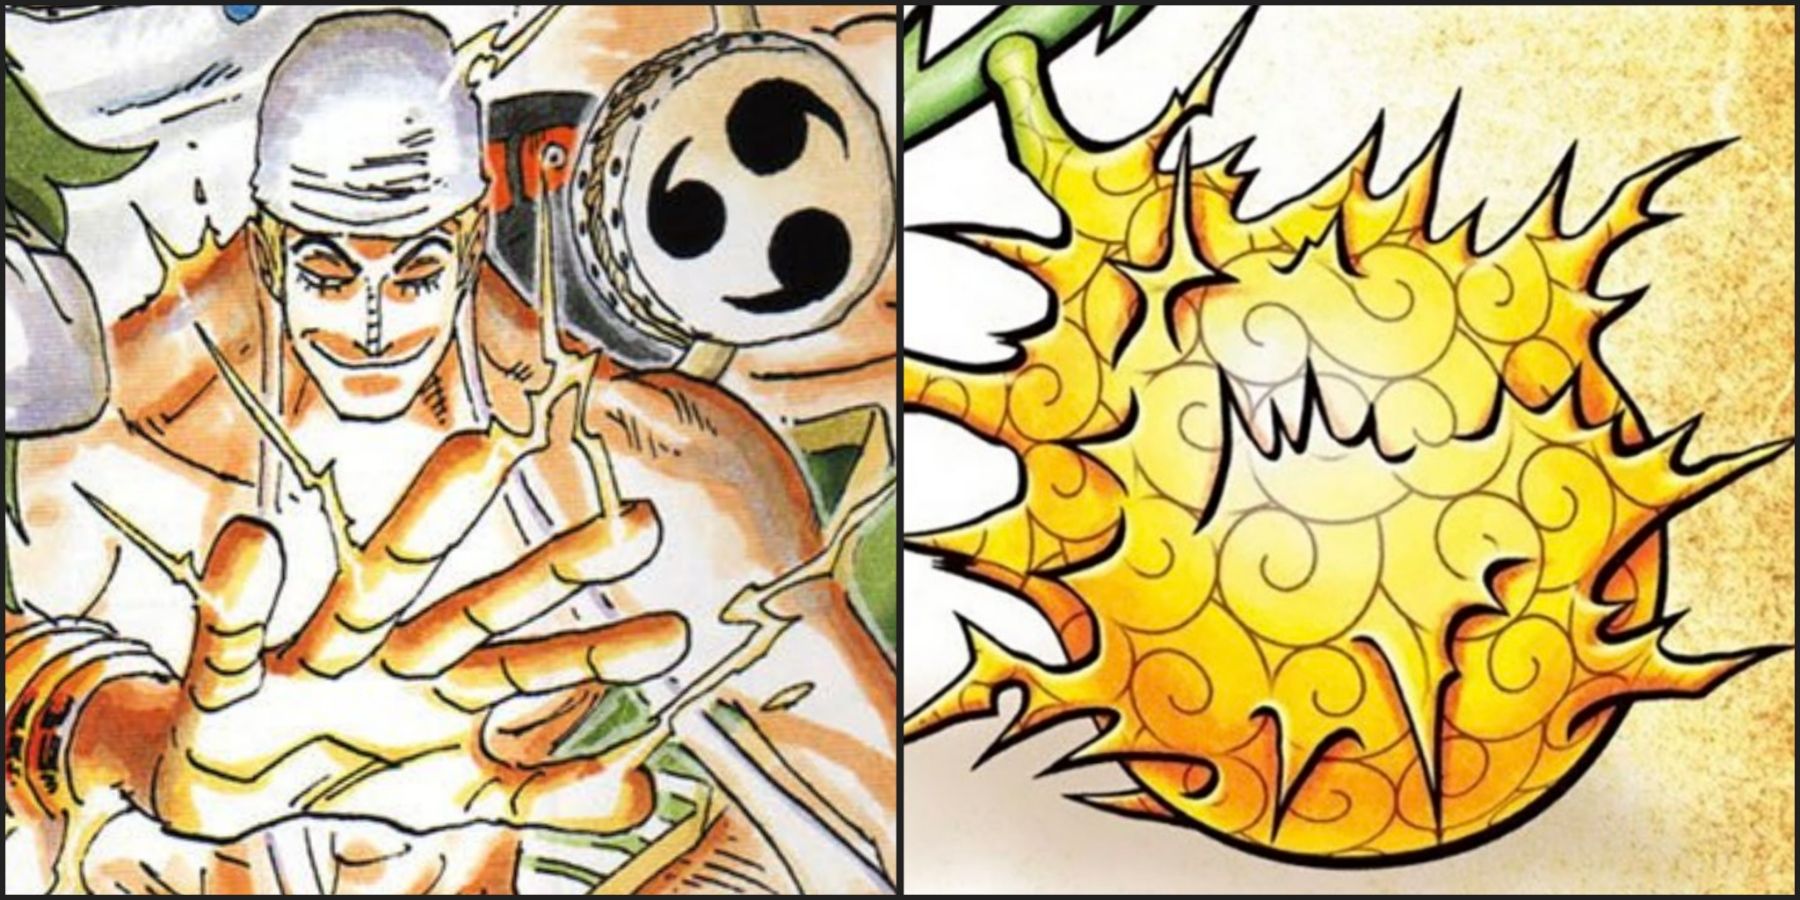 One Piece Reveals New Devil Fruits Designs For Perona and Enel